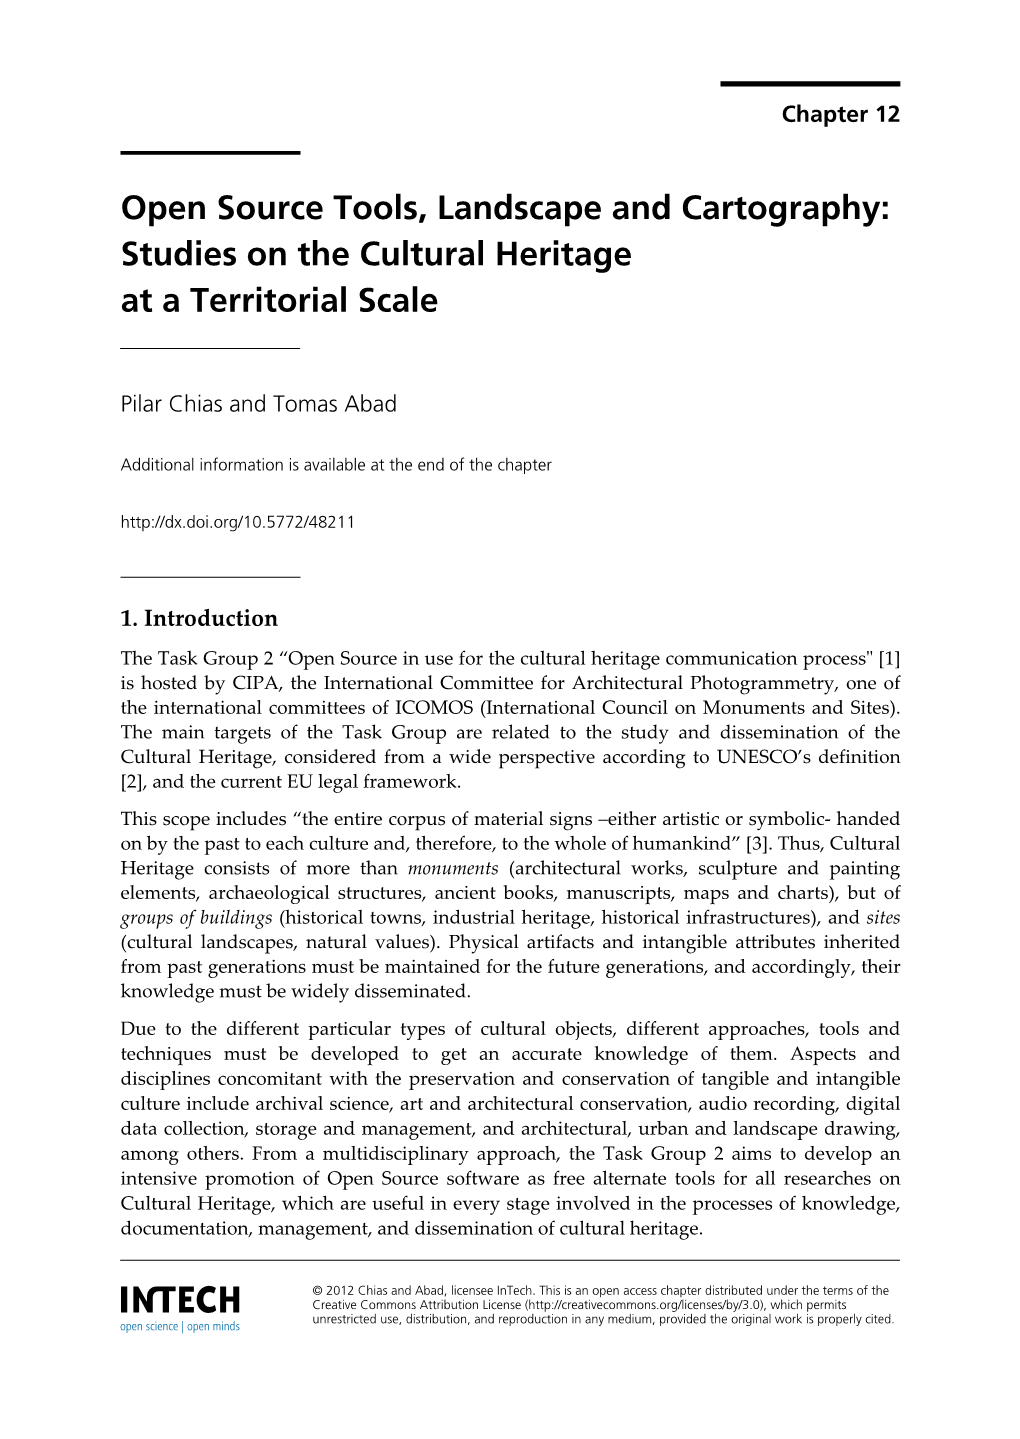 Studies on the Cultural Heritage at a Territorial Scale